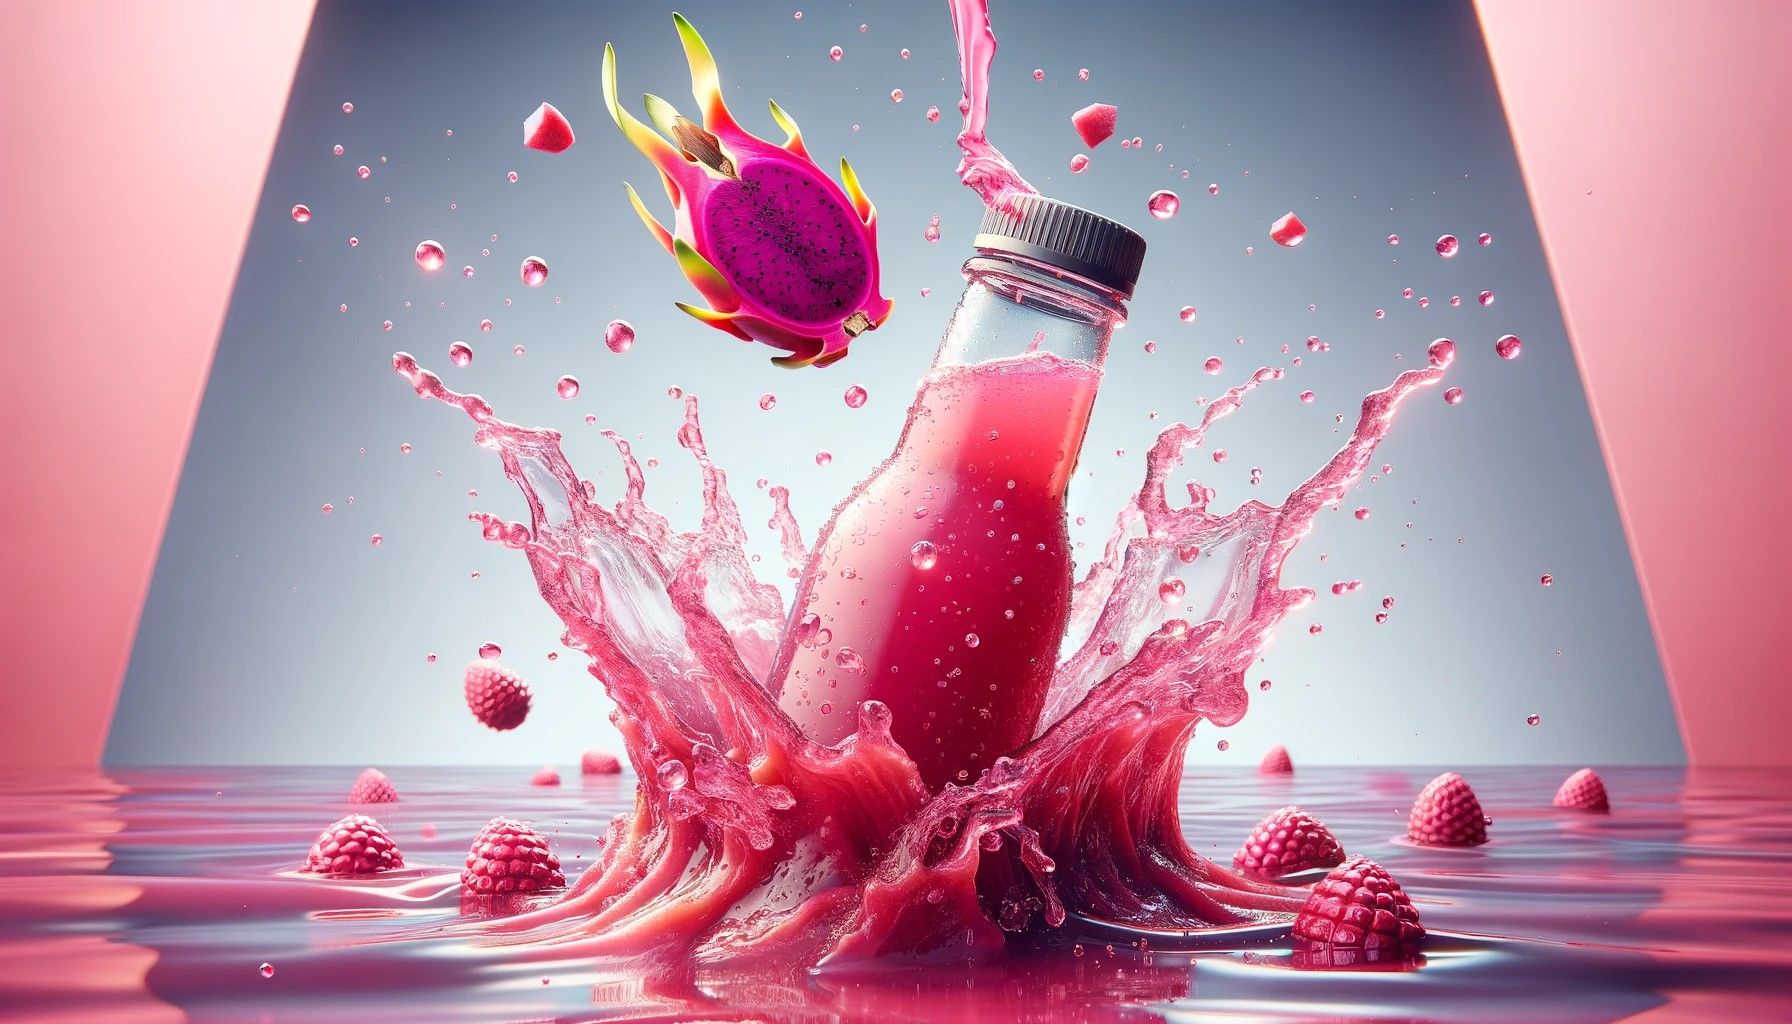 A bottle of juice dropping into a refreshing pool of dragon fruit juice, capturing the dynamic splash and vivid colors.